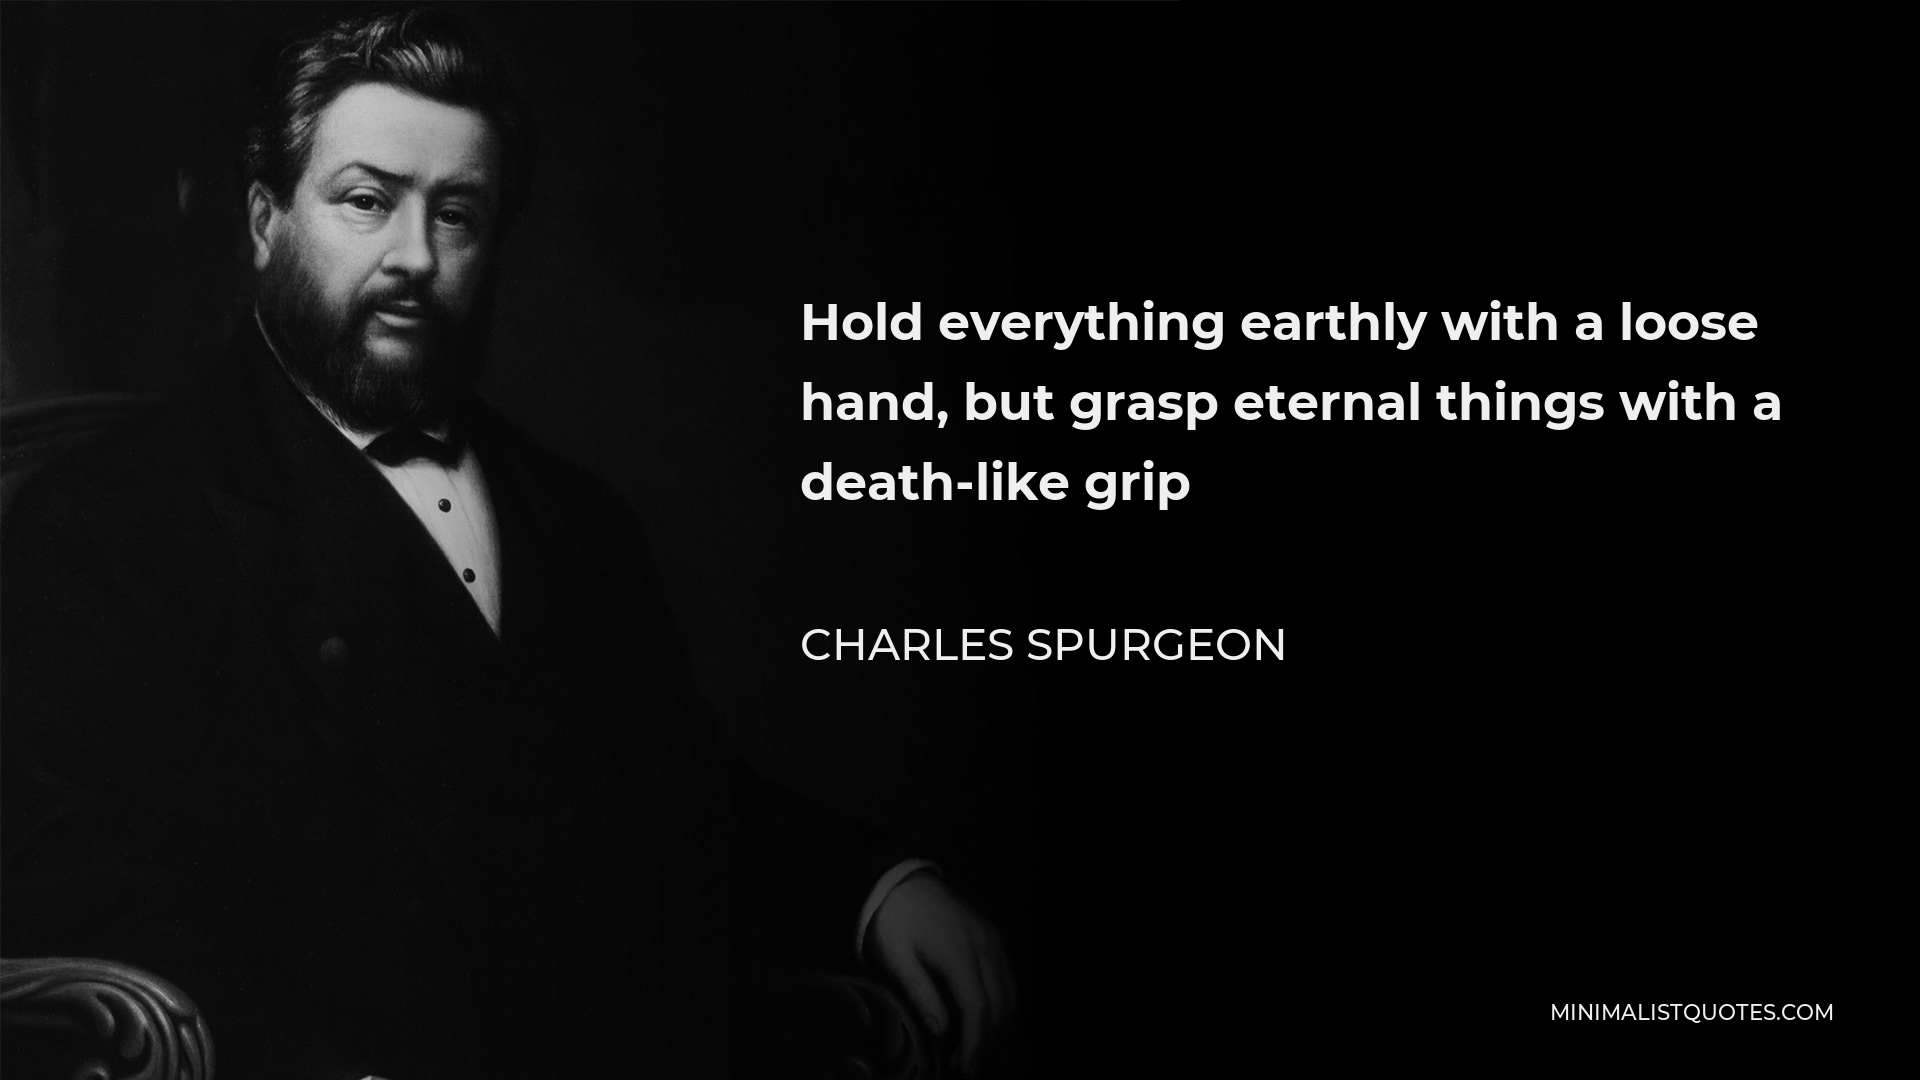 Charles Spurgeon Quote - Hold everything earthly with a loose hand, but grasp eternal things with a death-like grip